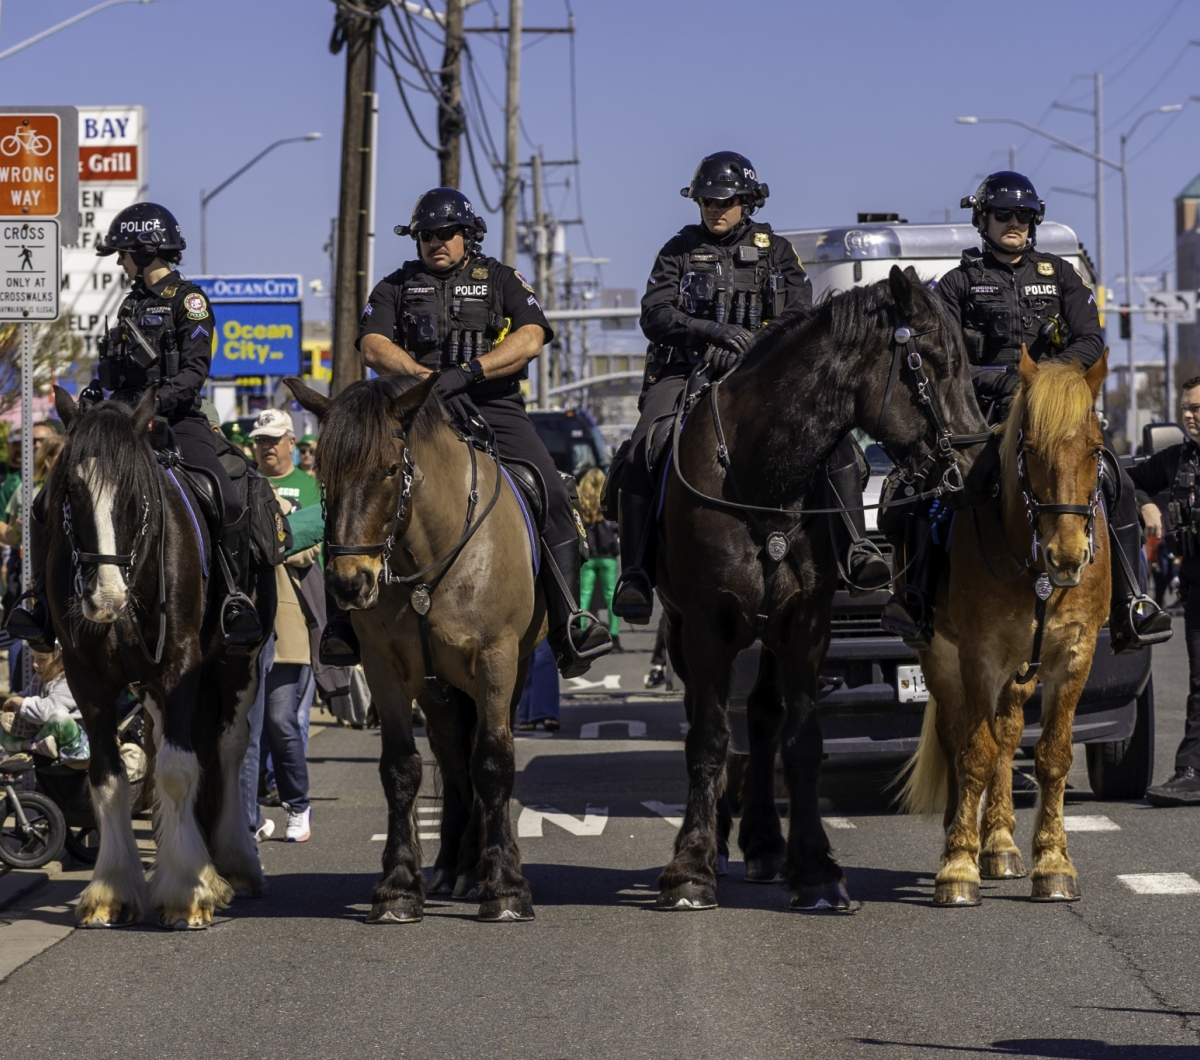 OC police officers on horses